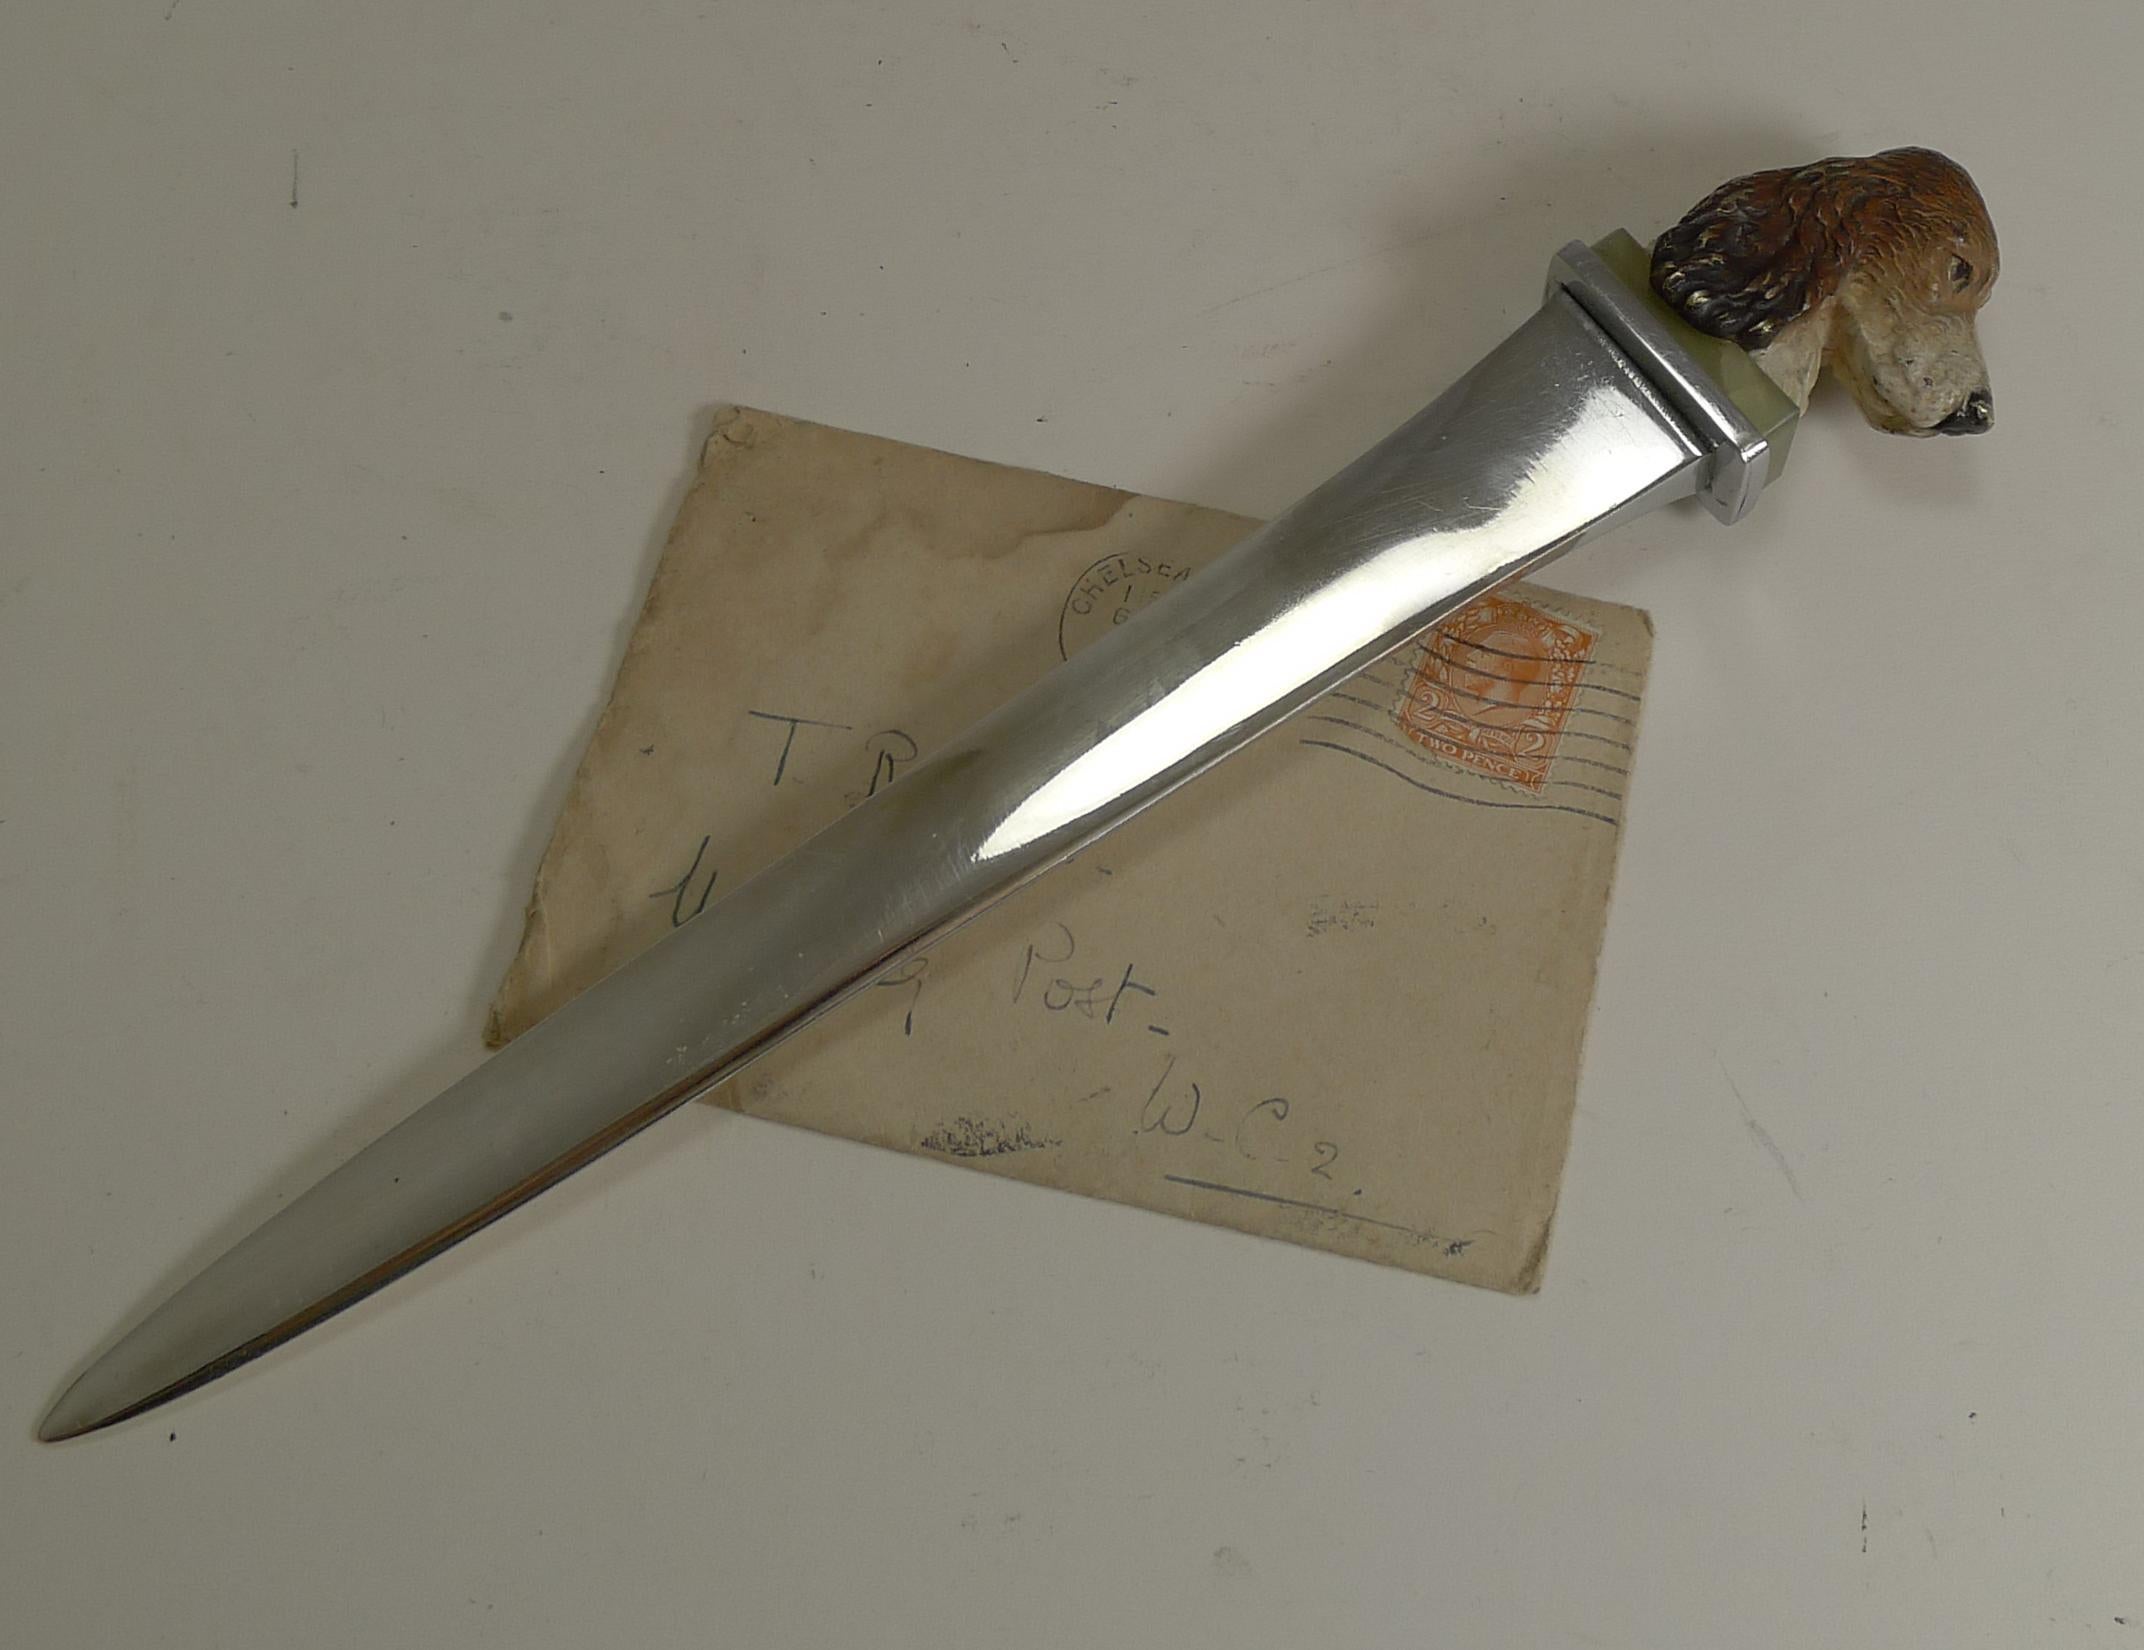 A fabulous and very handsome desk-top letter opener, the blade is nickel over brass or bronze and the terminal, which is of course the main event, is a cast bronze head of a Spaniel.

The dog sits on a block of green onyx and is cold-painted with